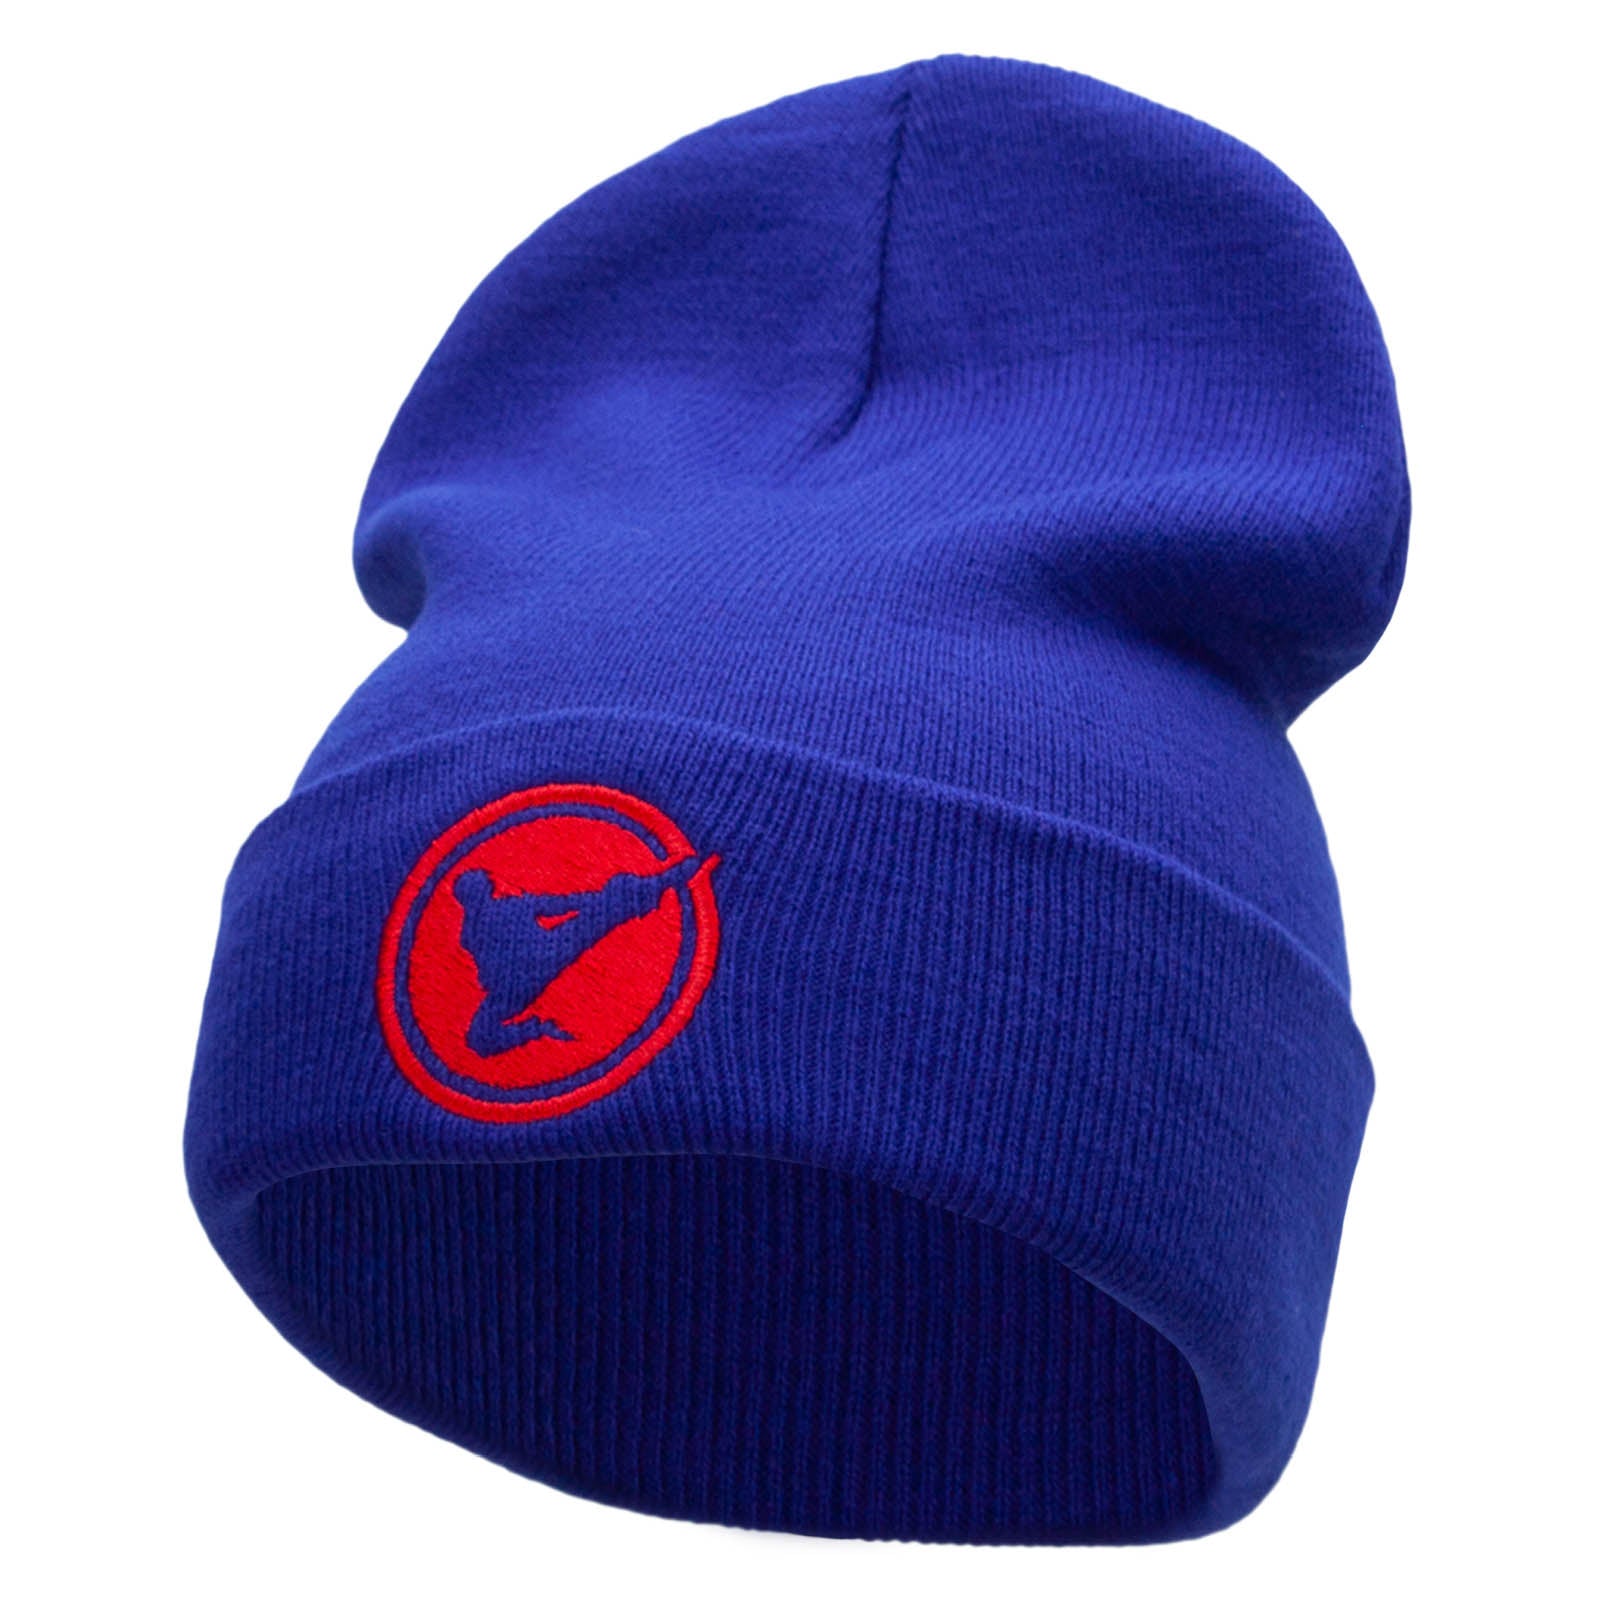 Karate High Kick Embroidered 12 Inch Long Knitted Beanie - Royal OSFM